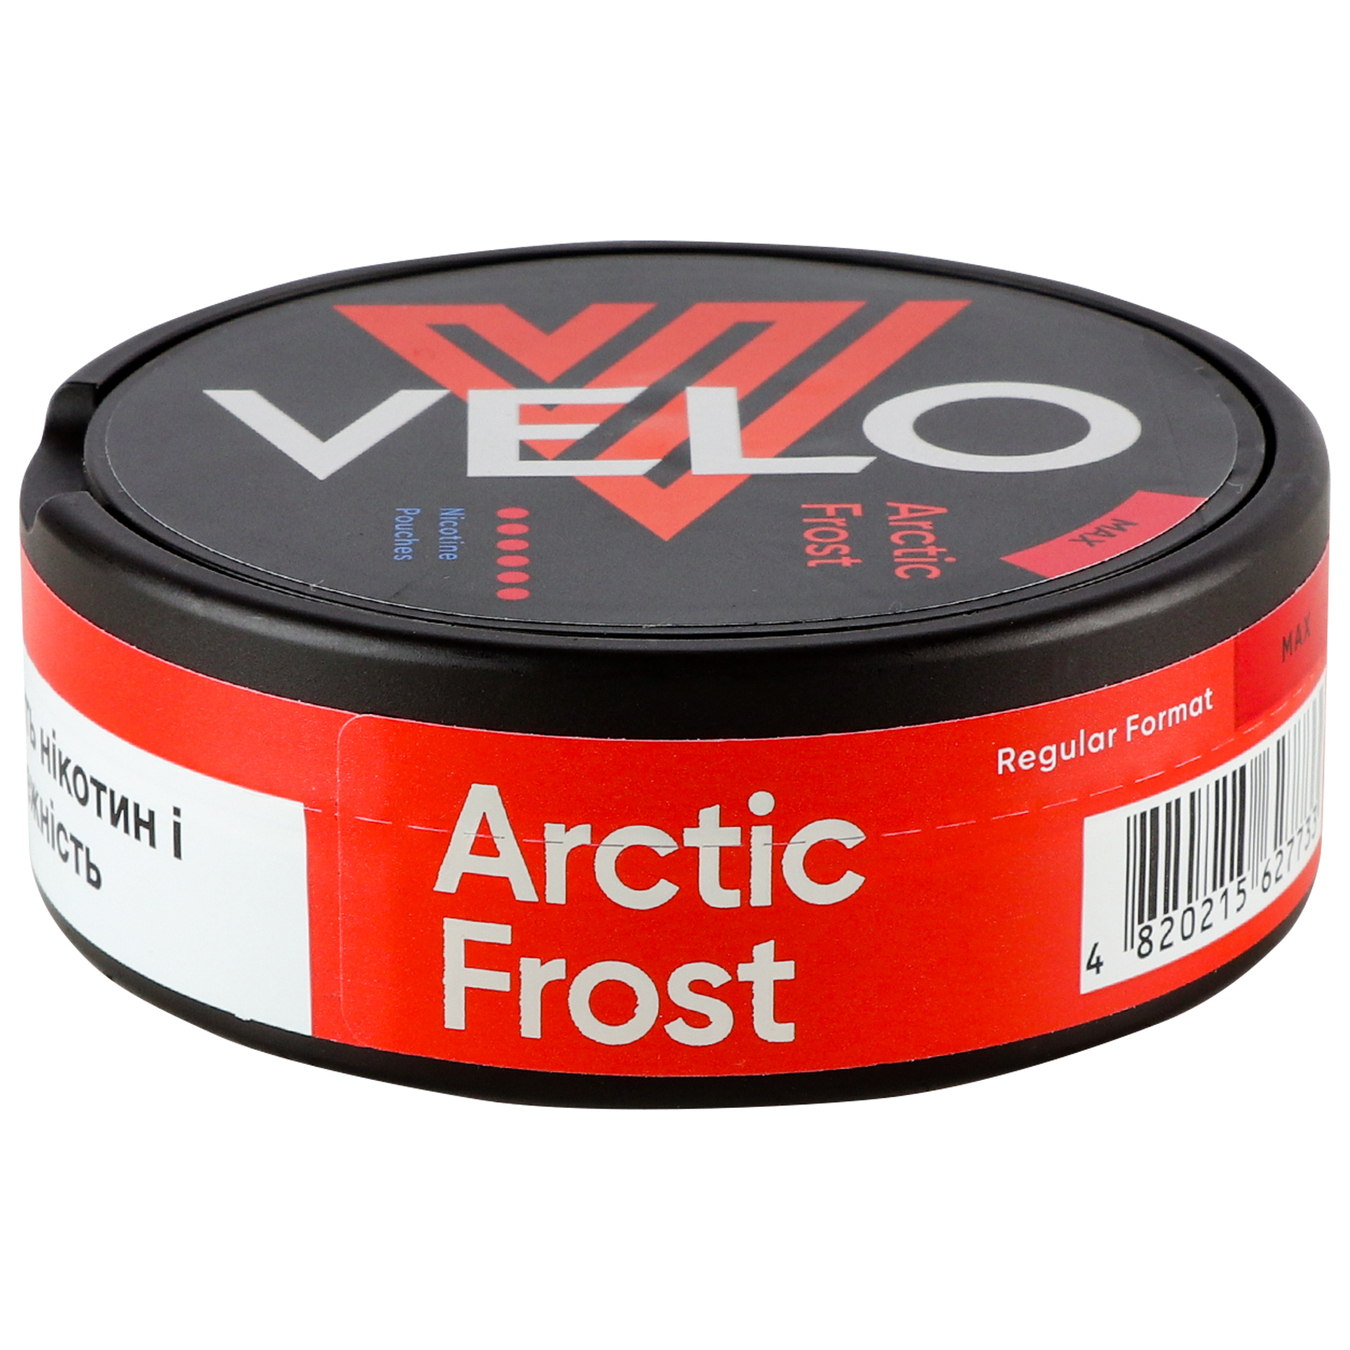 VELO Arctic Frost Max nicotine pads 18pcs (the price is without excise tax) 2